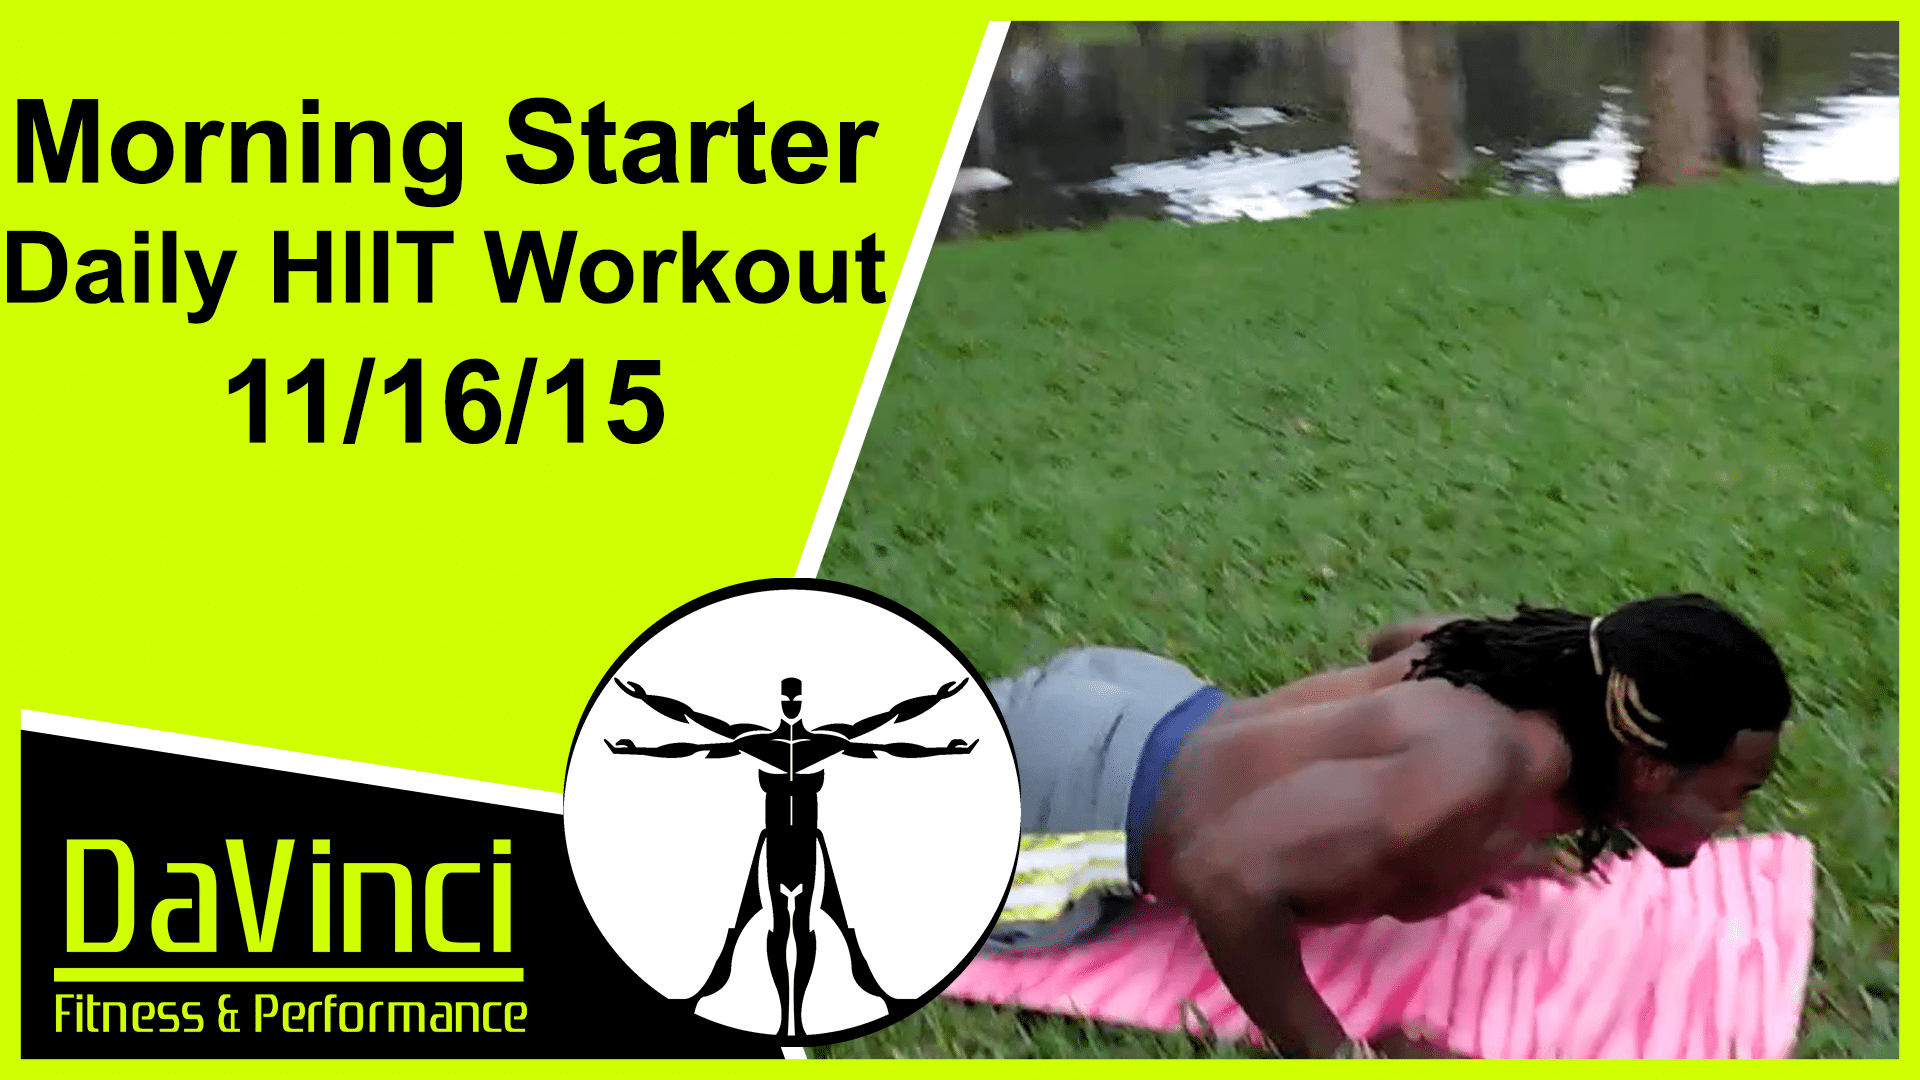 Morning Starter Daily HIIT workout